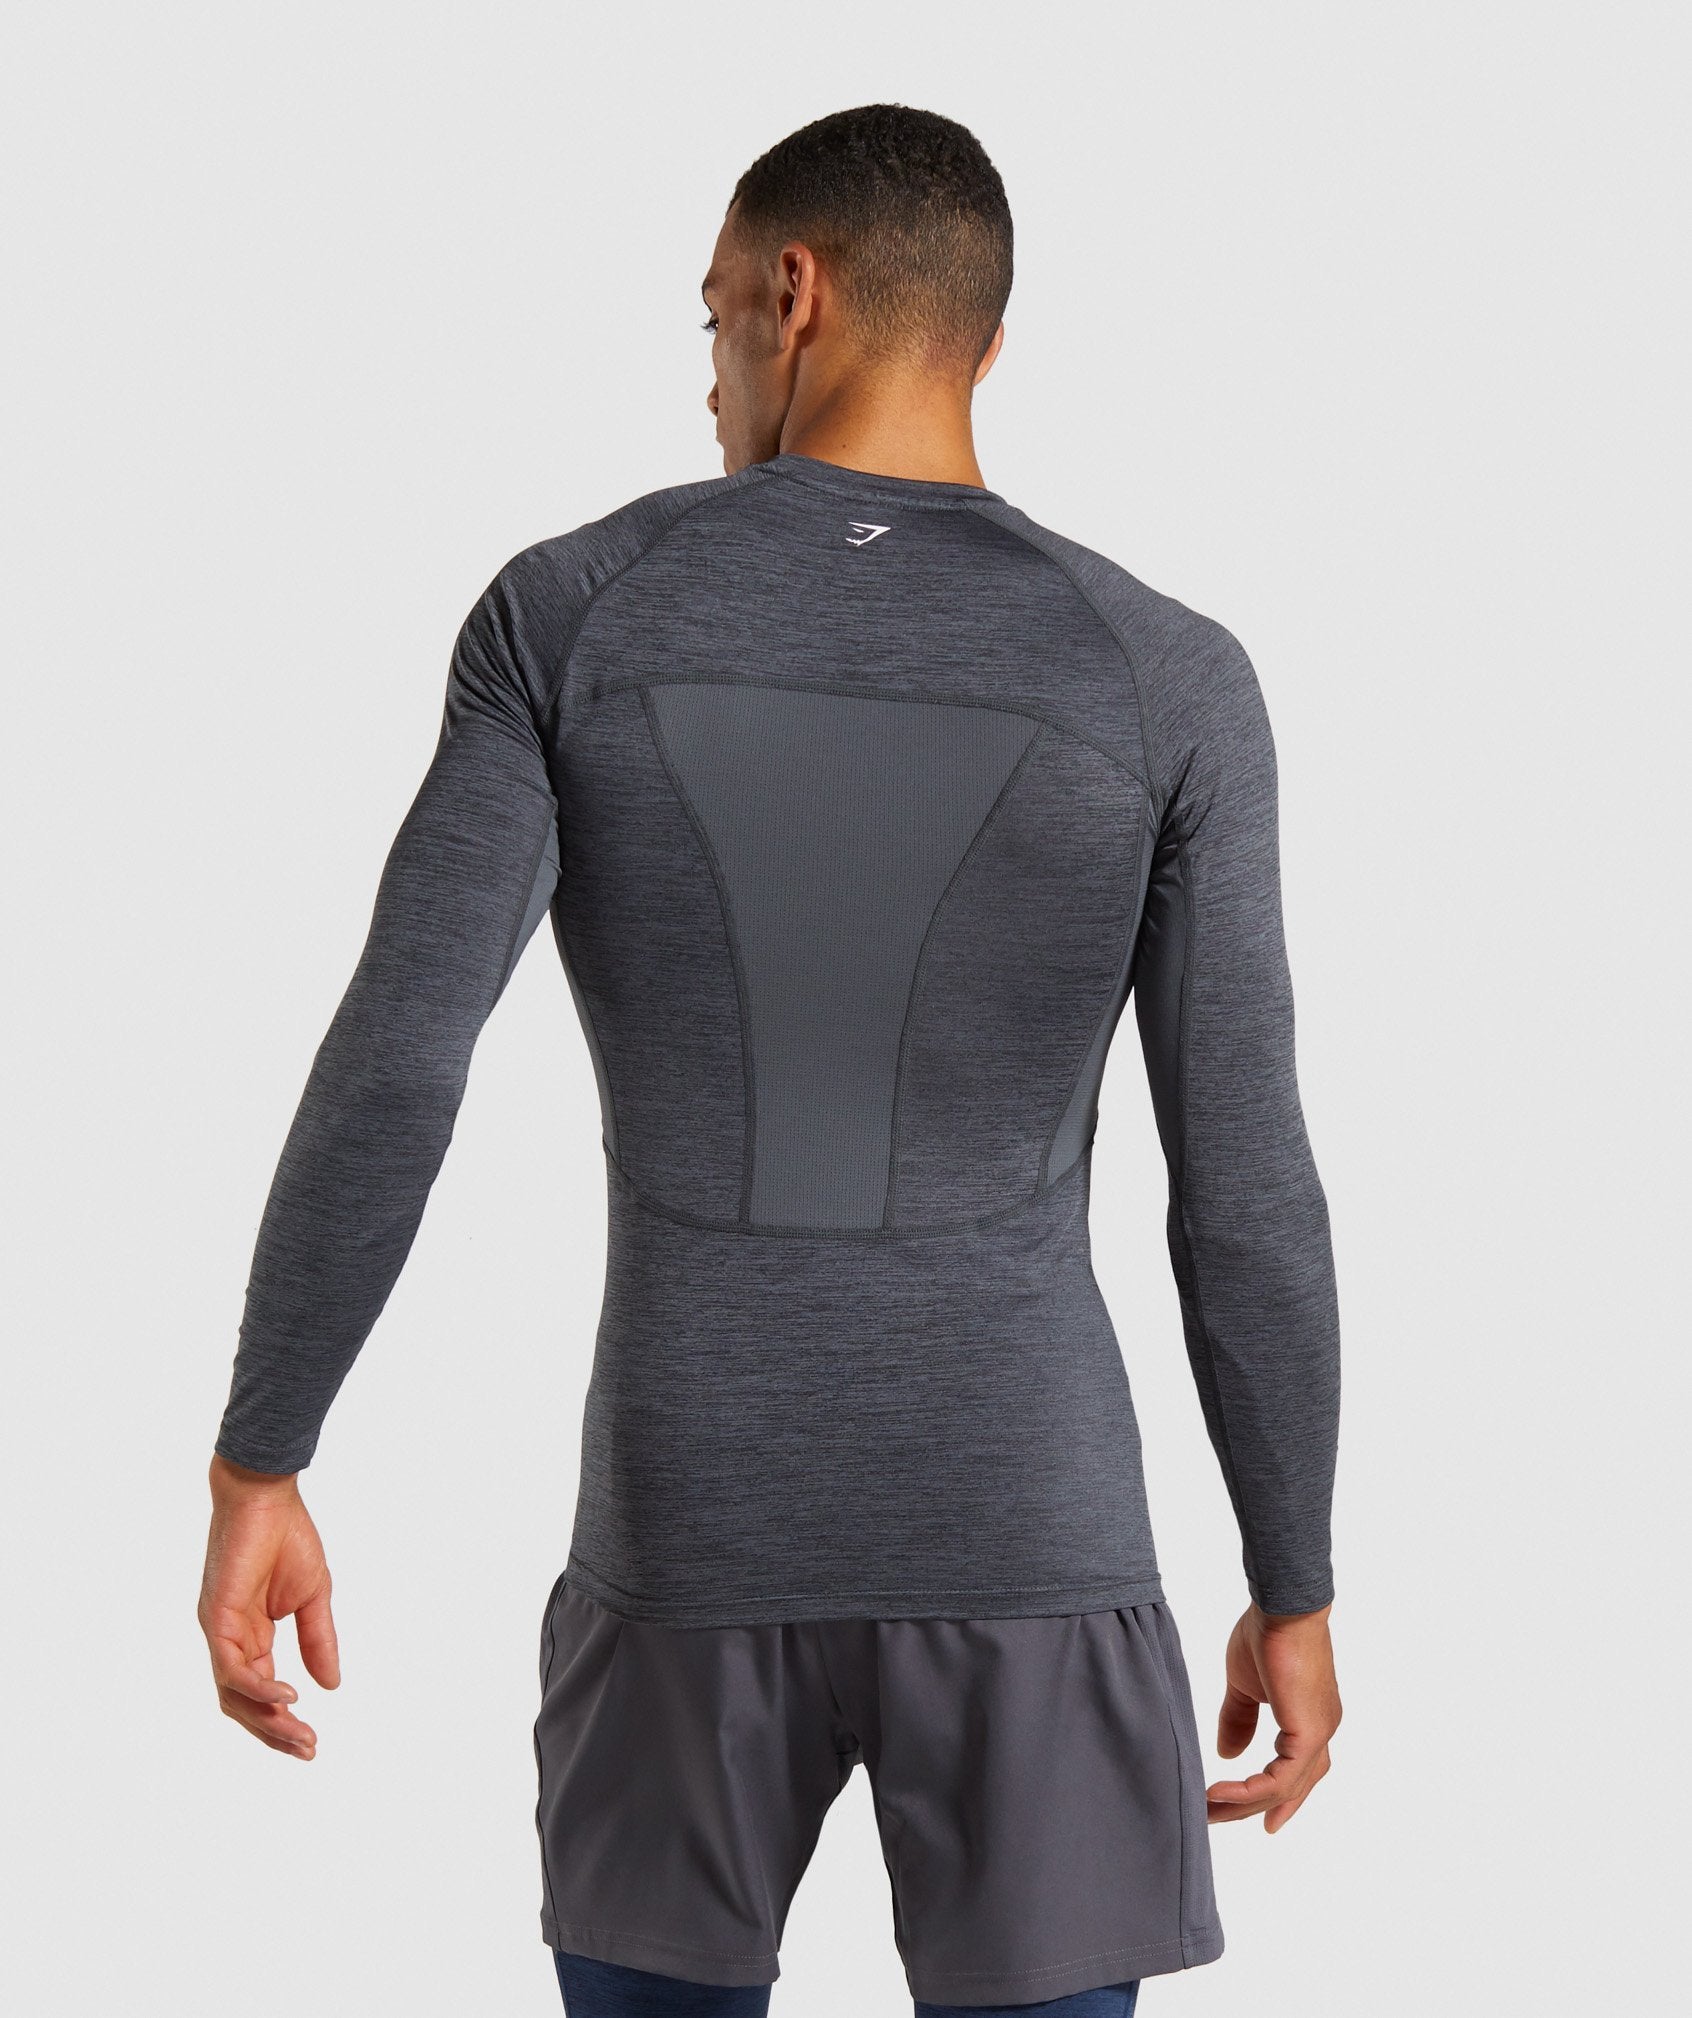 Element+ Baselayer Long Sleeve Top in Black Marl/White - view 2